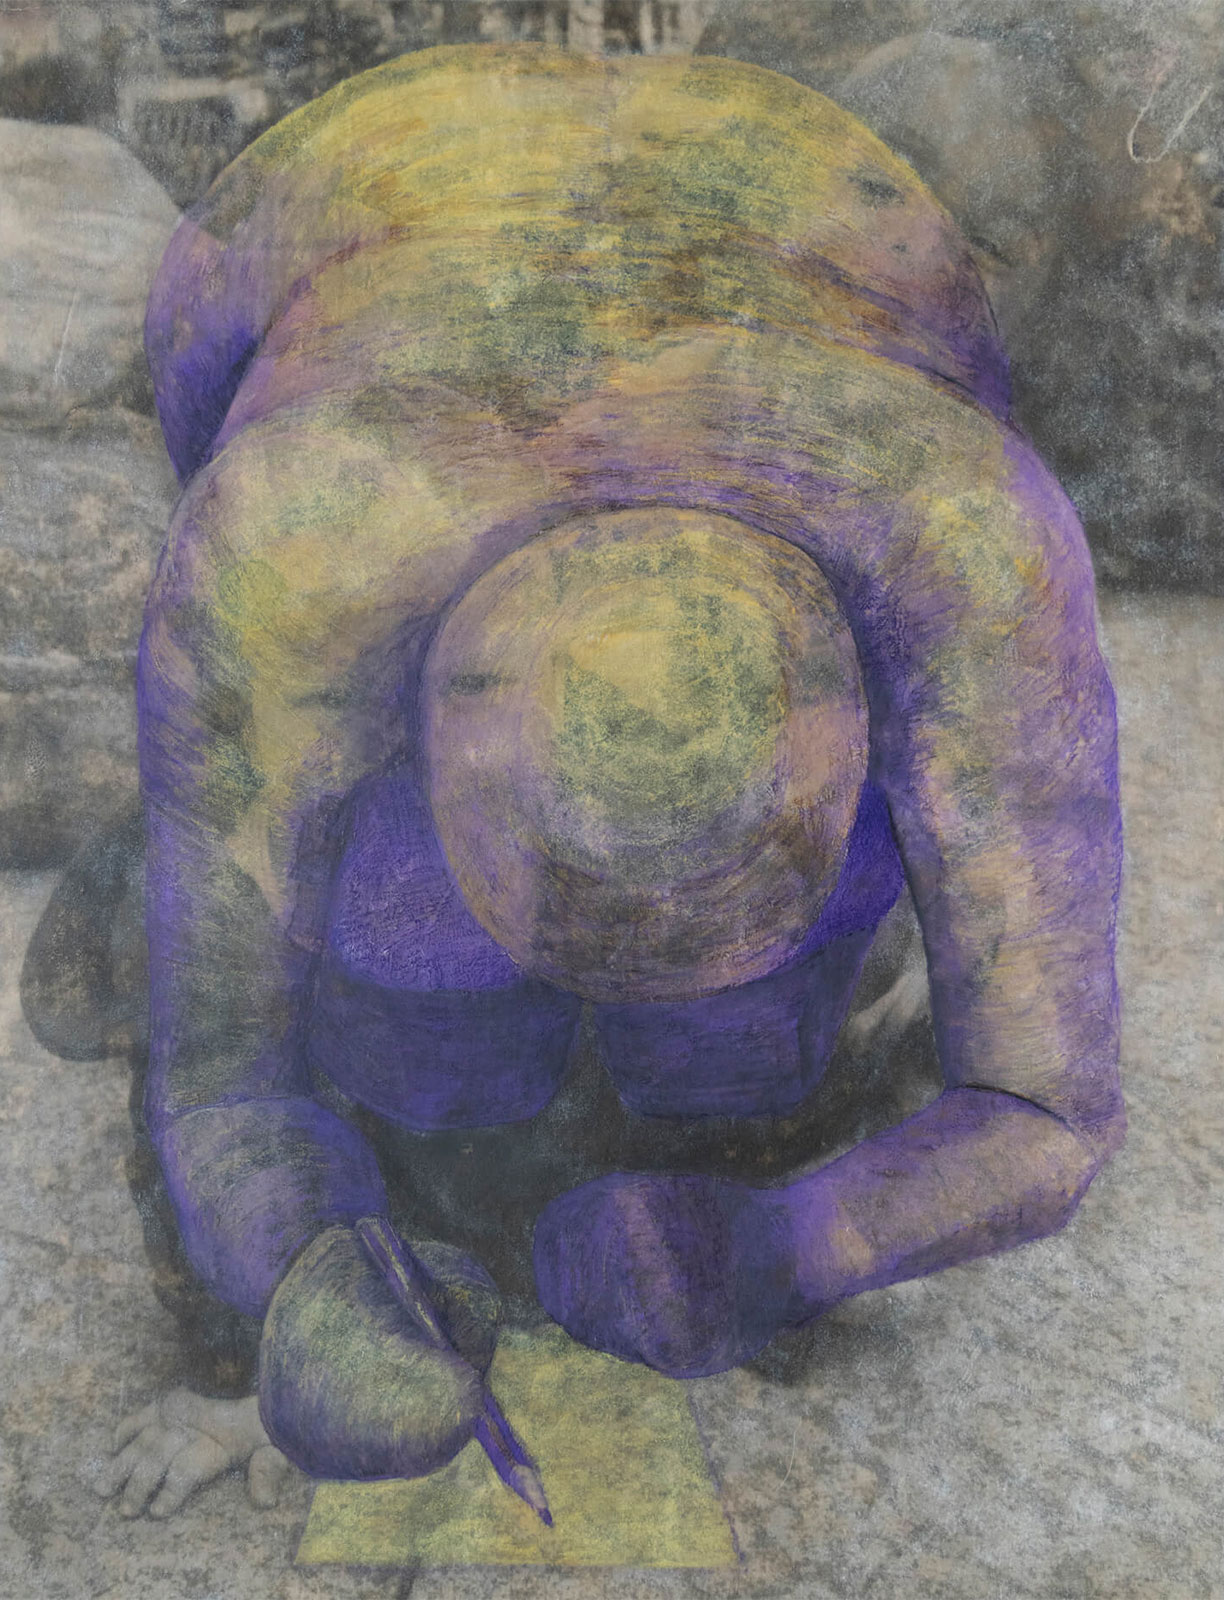 Abstract figure bent over writing on something on the floor in purples, yellows, and greys